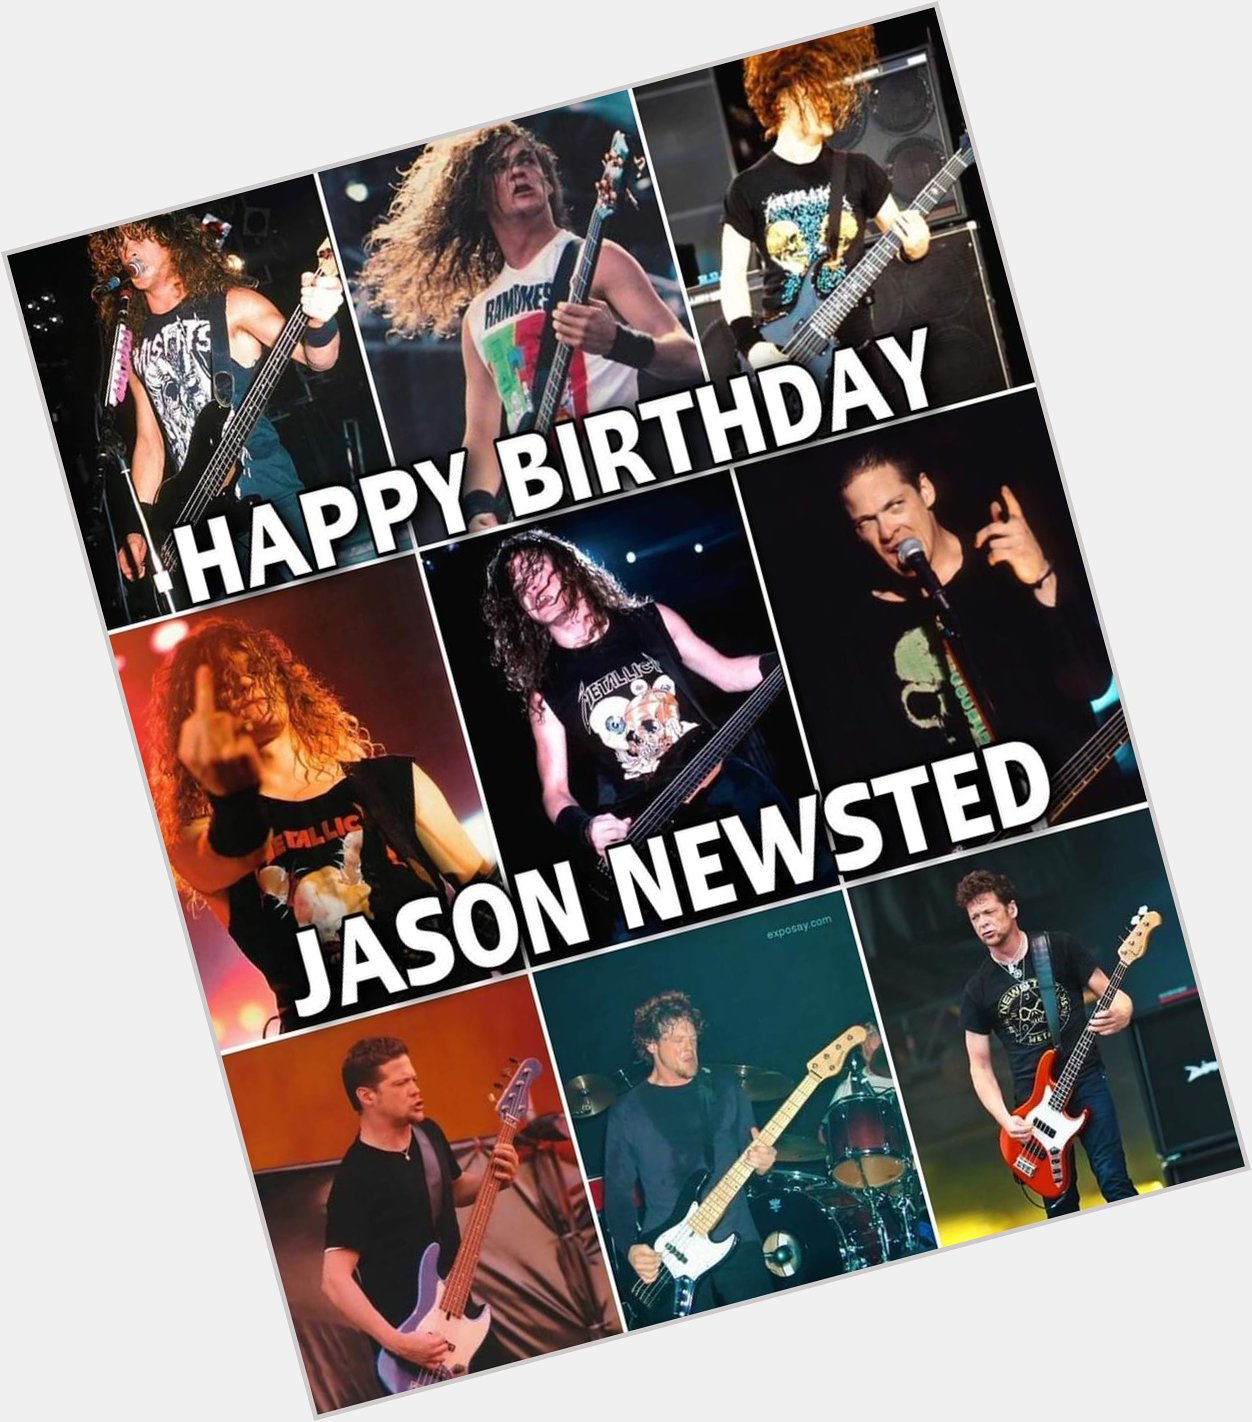 Happy birthday 
Jason Newsted
Vocals and bass
Former member of Metallica 
Born March 4th 1963 